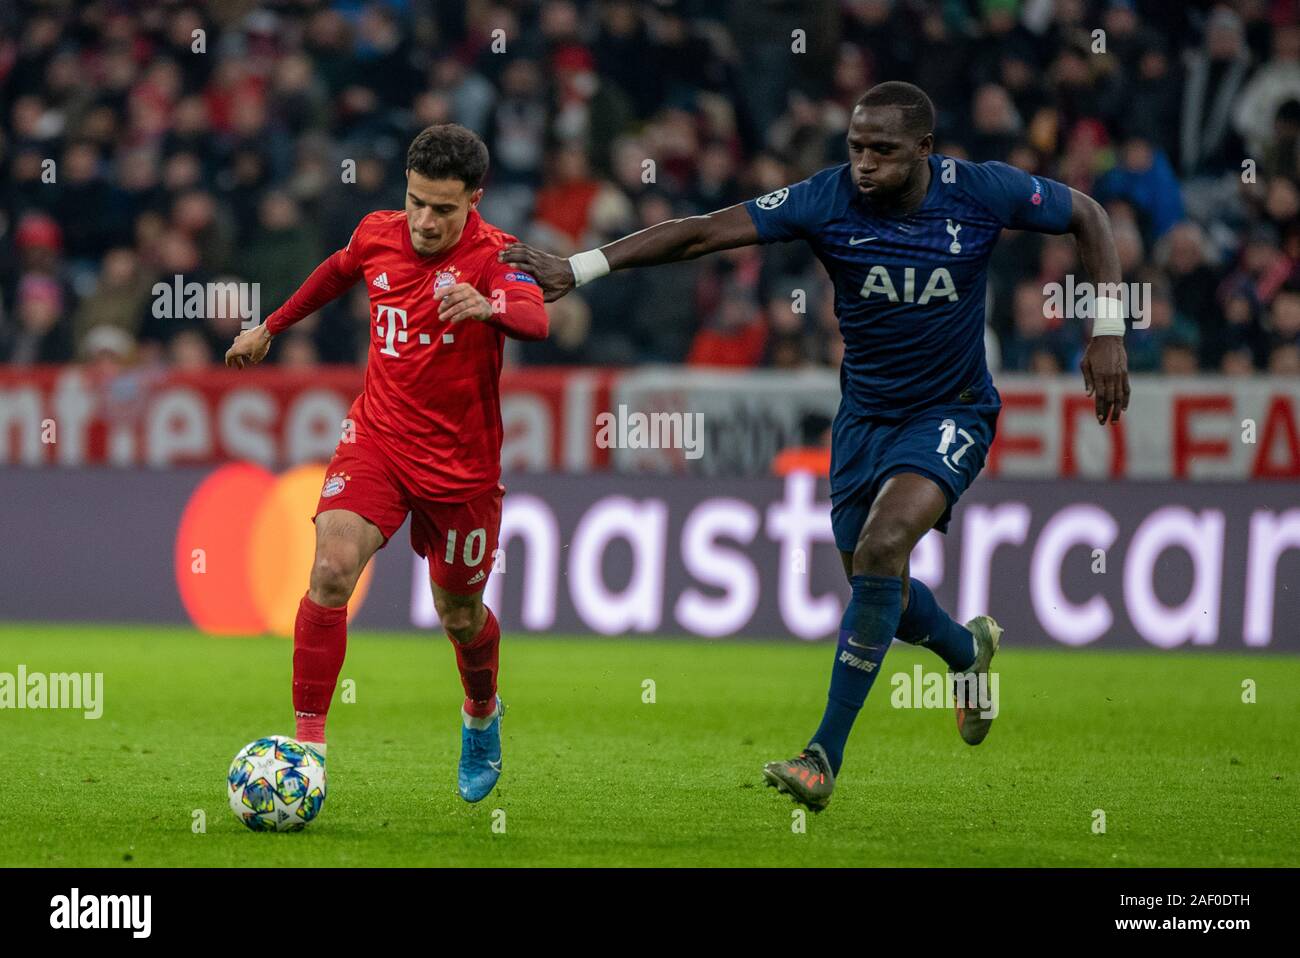 MUNICH, GERMANY - DECEMBER 11: Philippe Coutinho (FC Bayern Muenchen) and  Moussa Sissoko (Tottenham Hotspurs) at the Football, UEFA Champions League,  Matchday 6: FC Bayern Muenchen vs Tottenham Hotspur at the Allianz-Arena